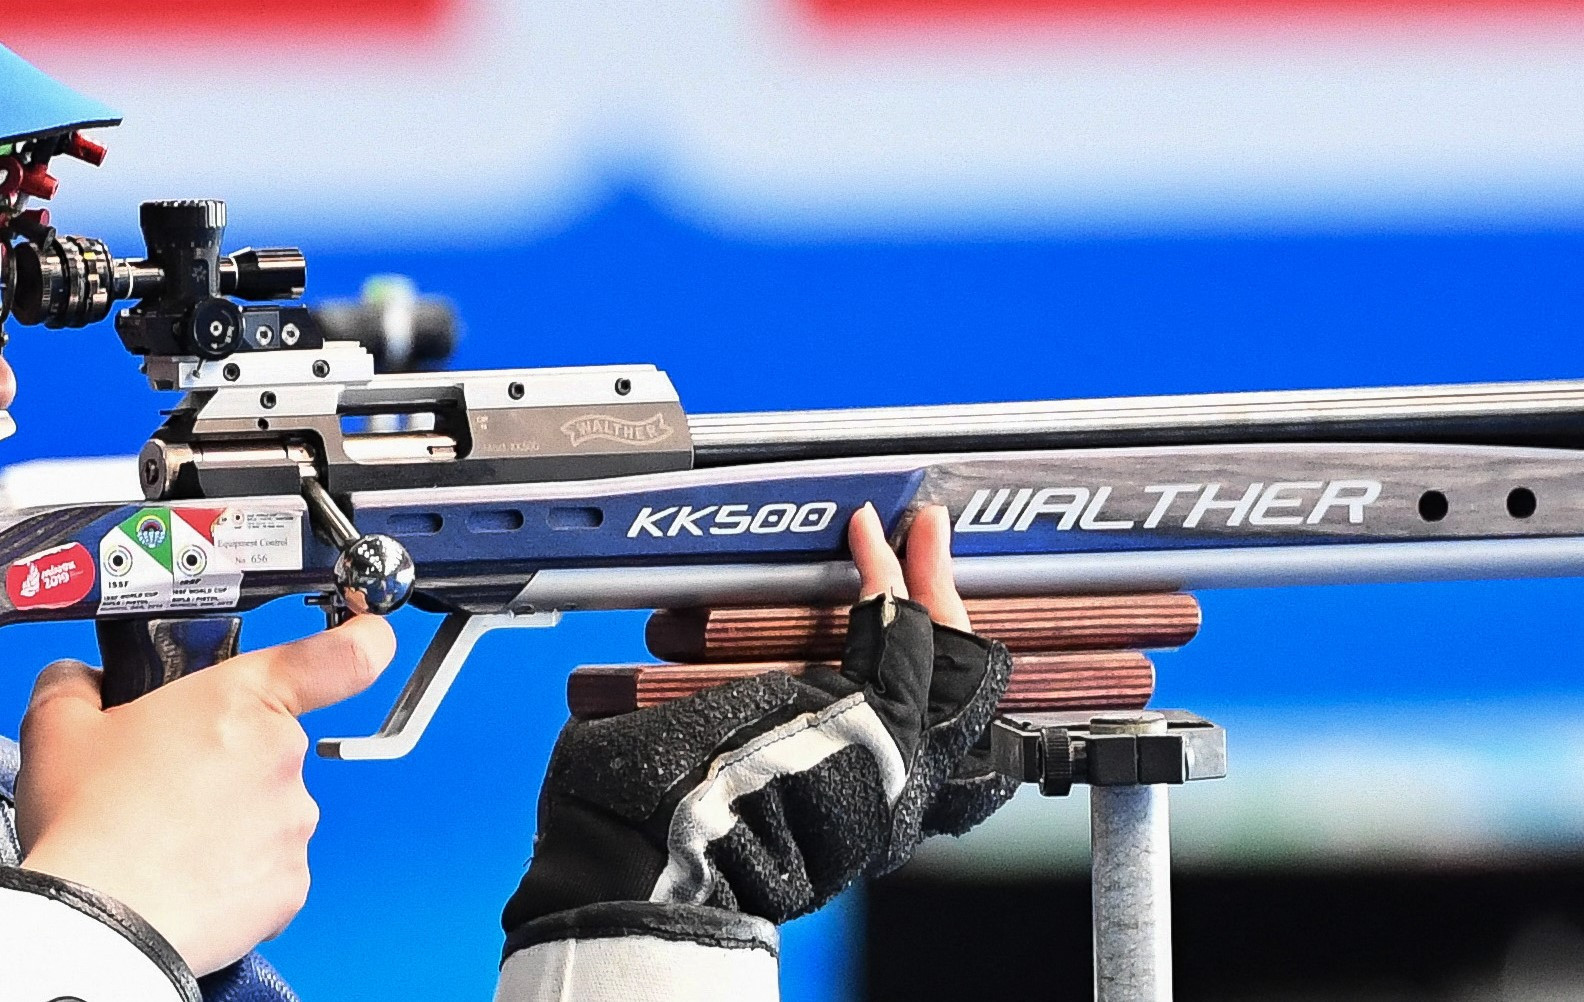 Shchetnik and Liverani triumph on final day of World Shooting Para Sport World Cup in Lima